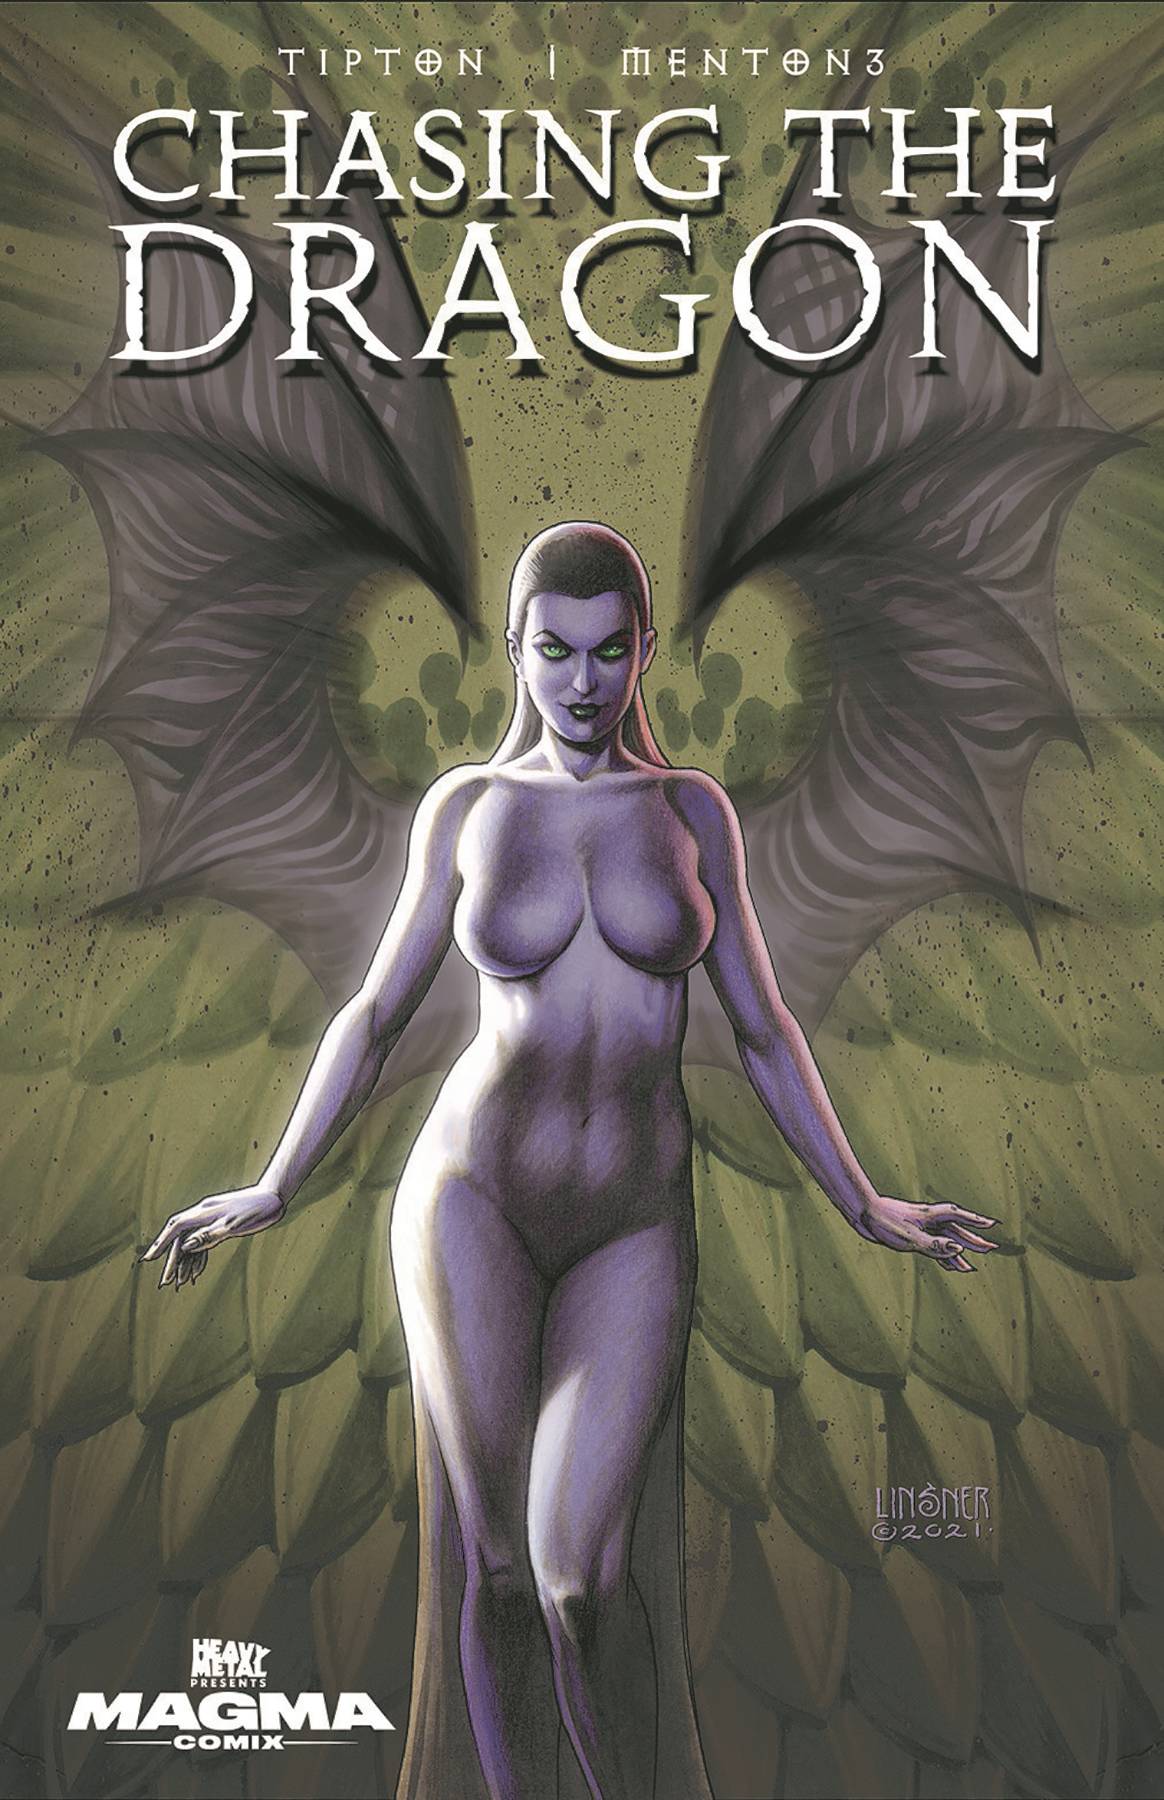 Chasing the Dragon (2021) #1 (of 5) 2nd Print